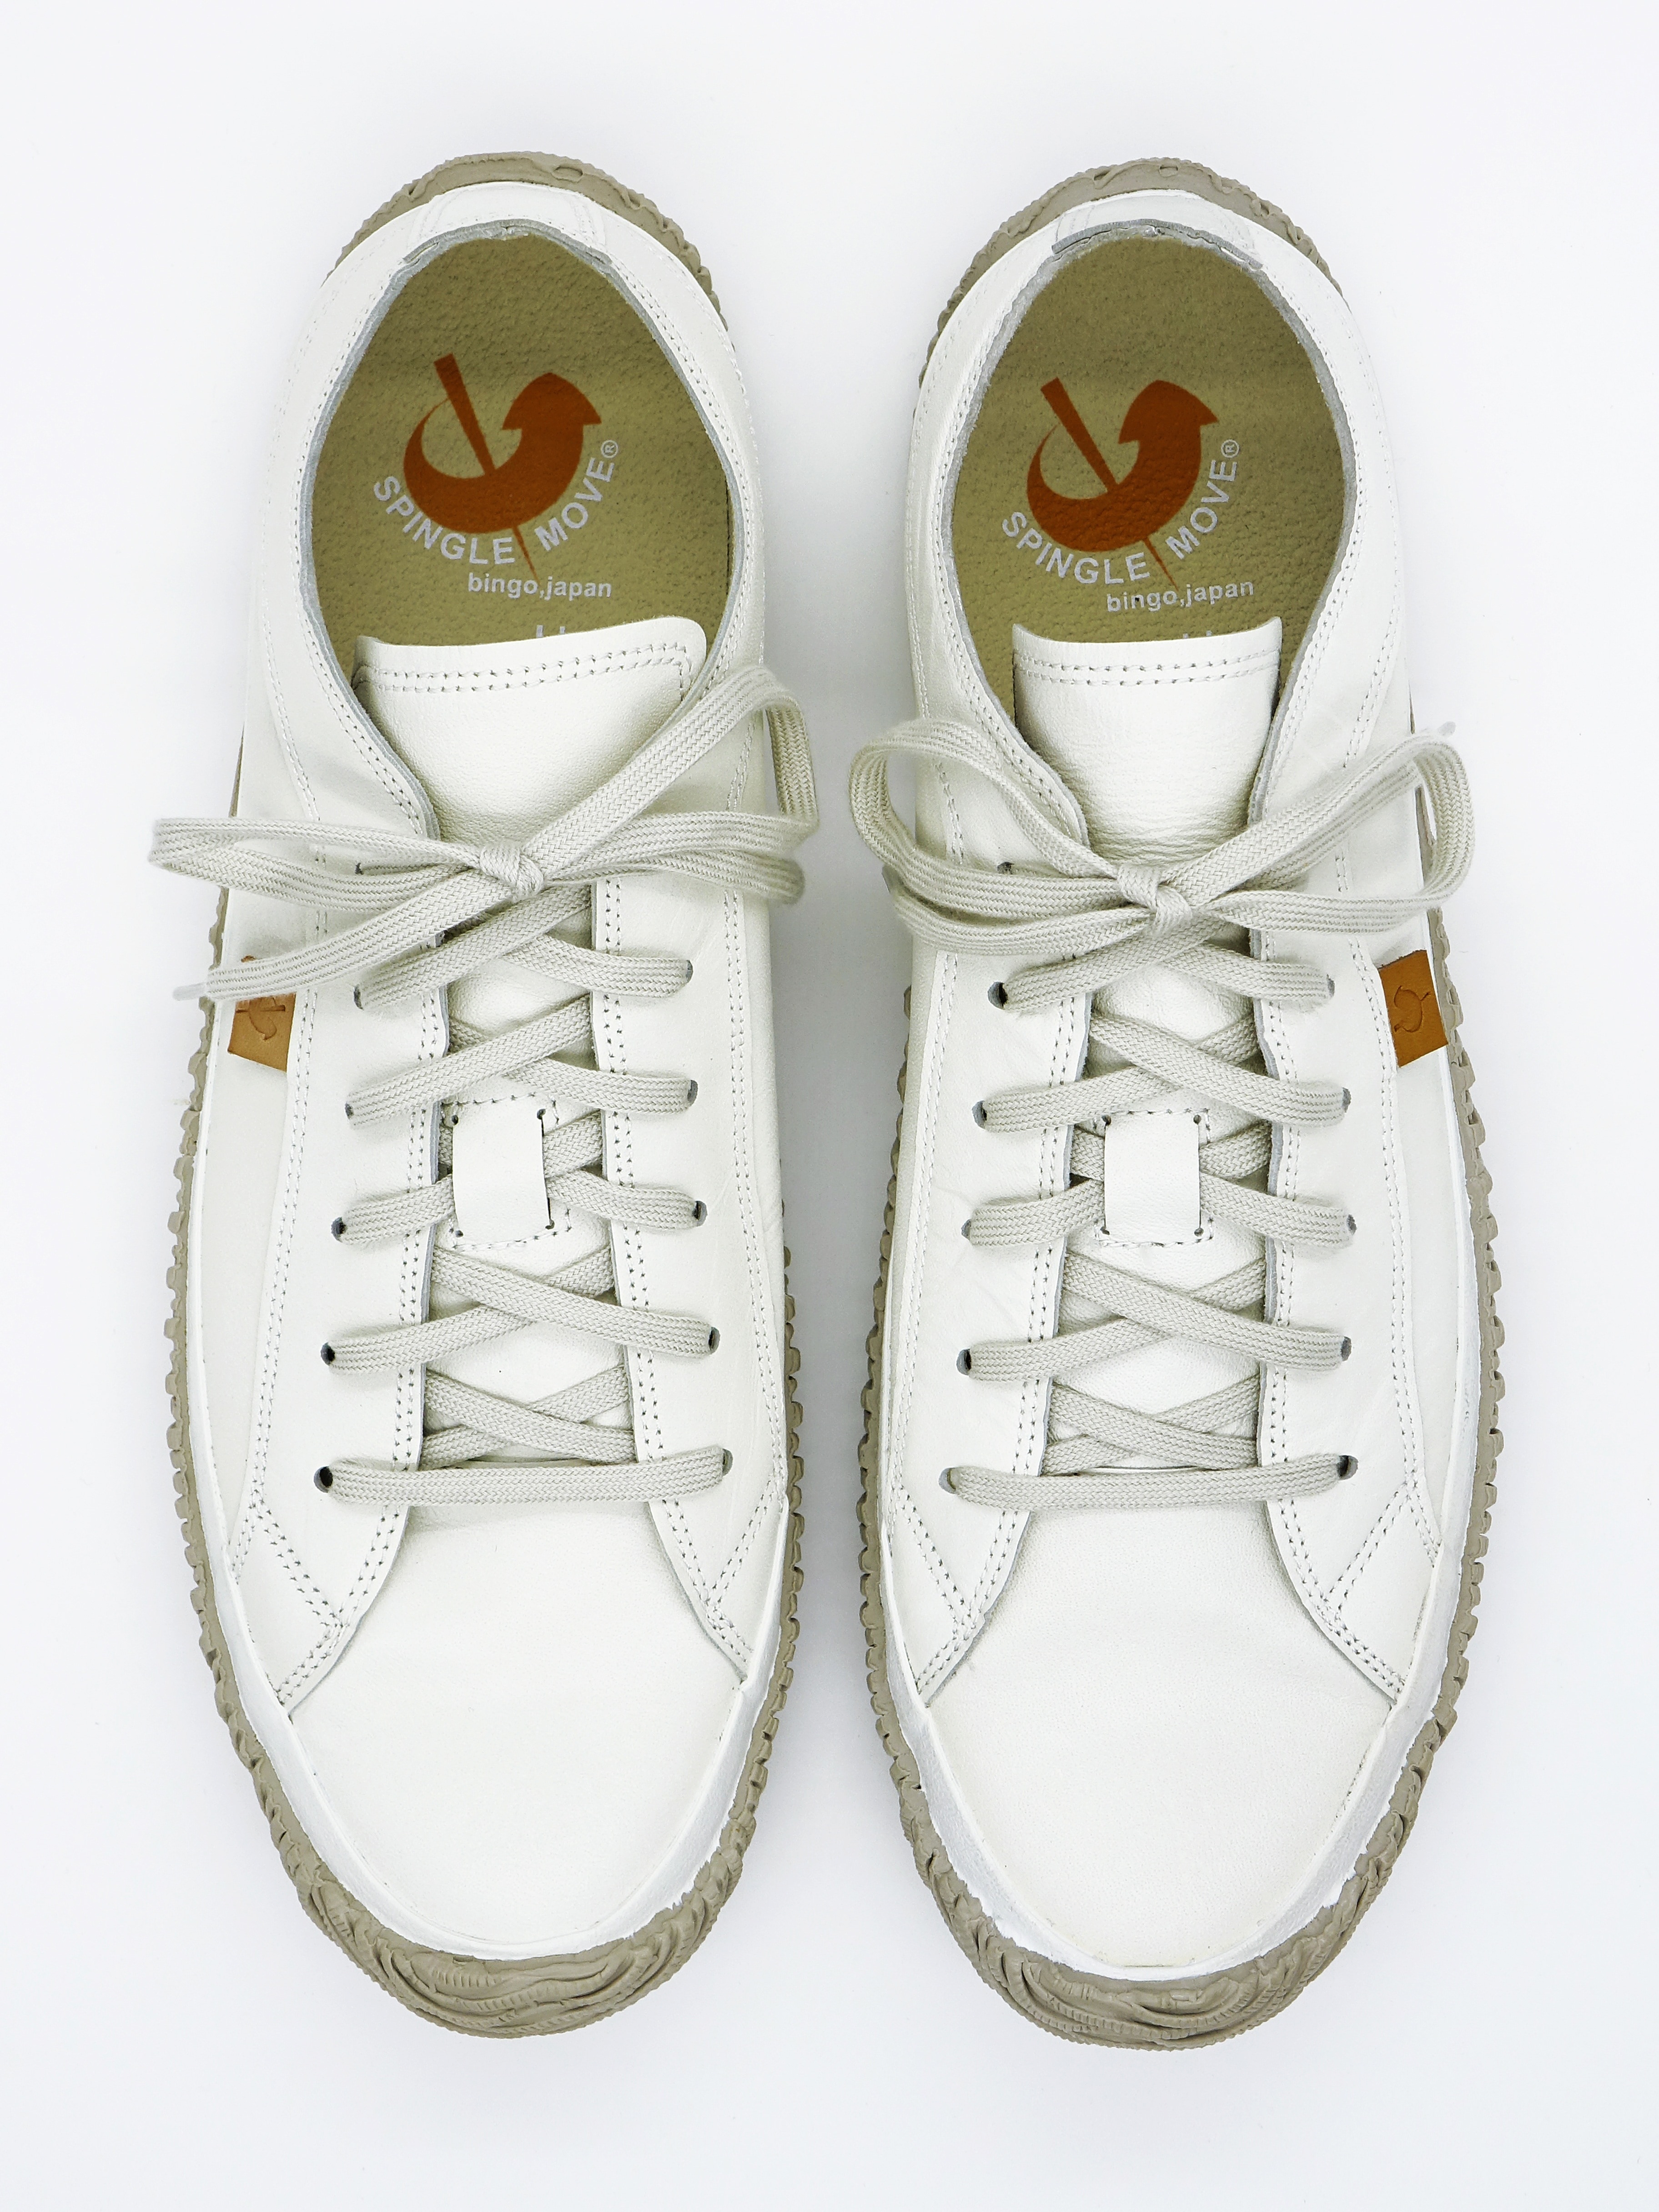 pair of white and gray spingle move leather shoes